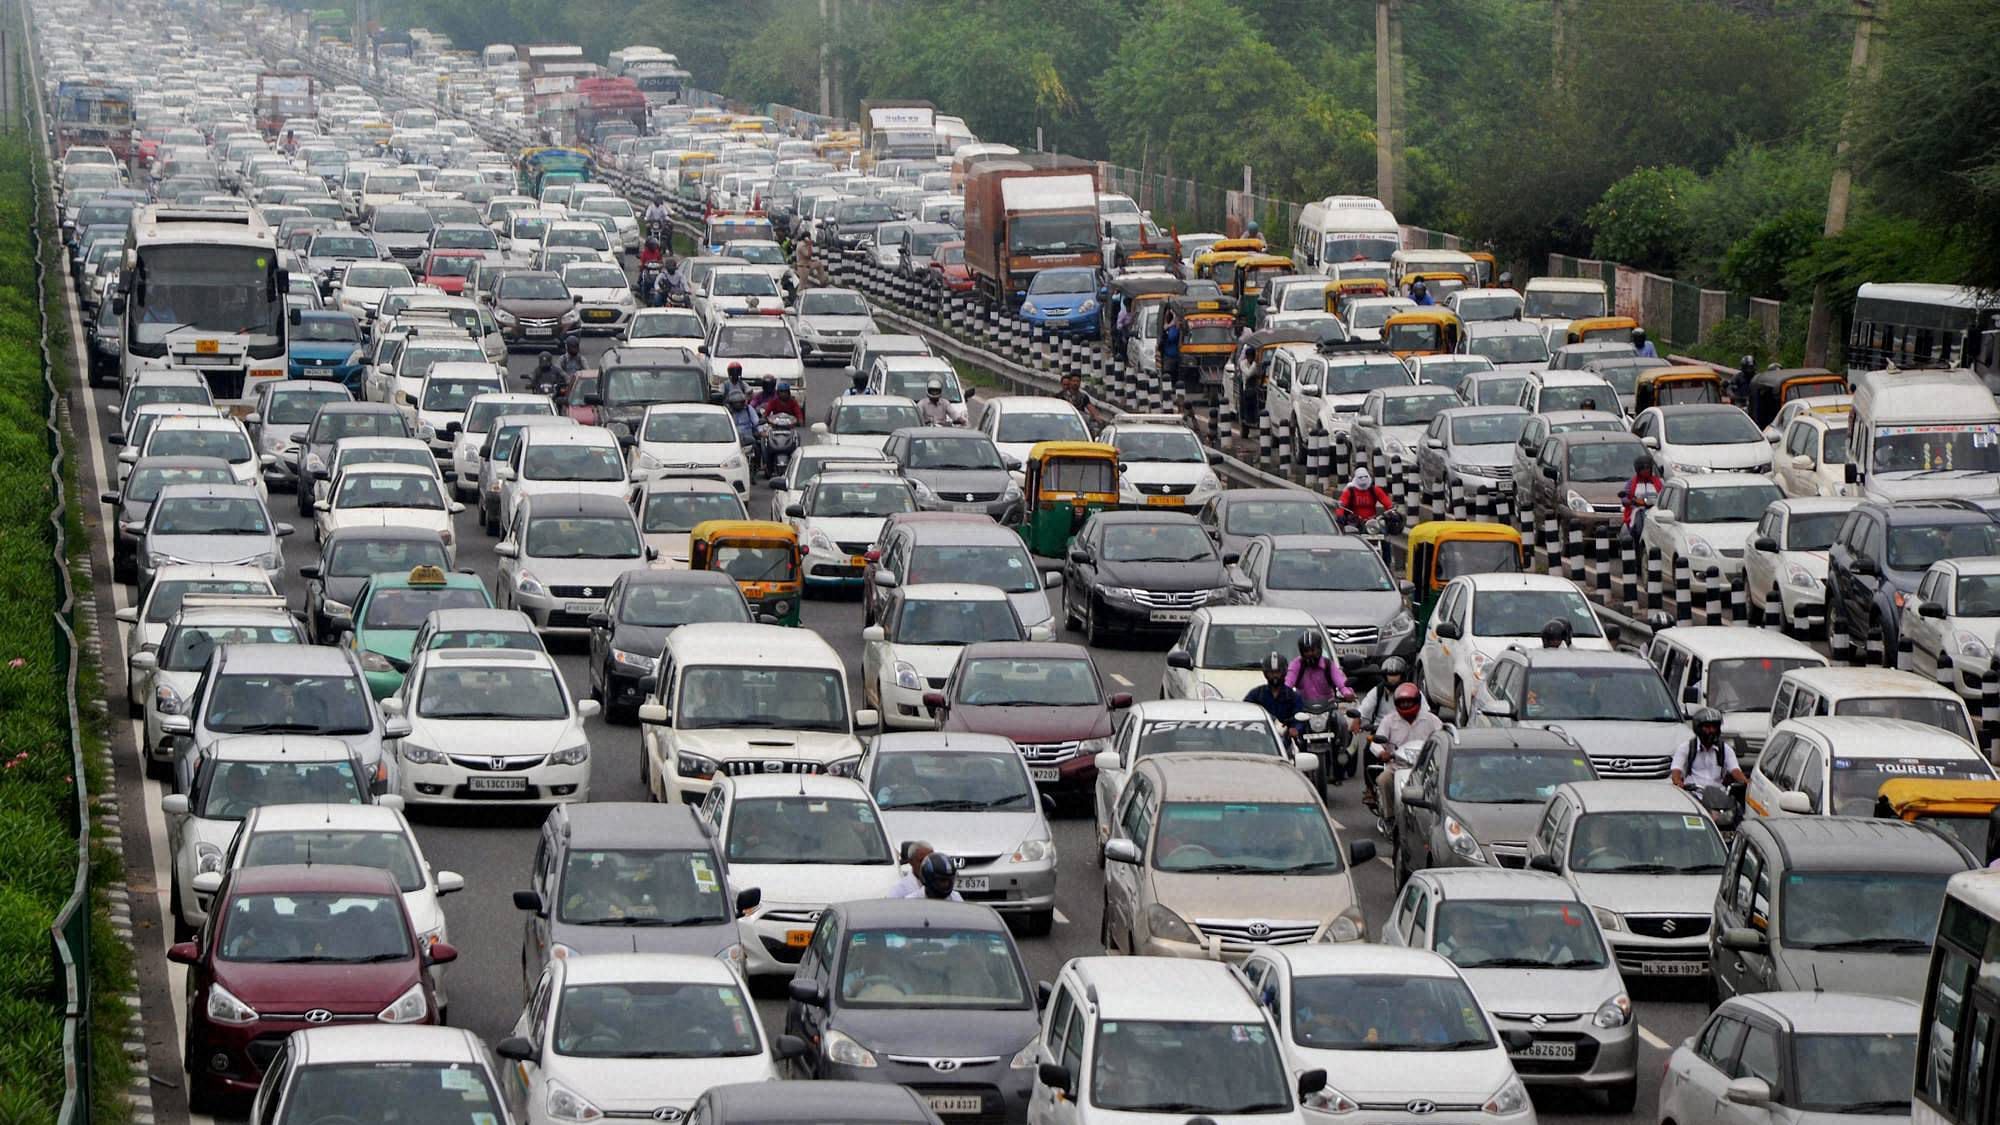 Commuters stuck in heavy traffic jam. Photo used for representation.